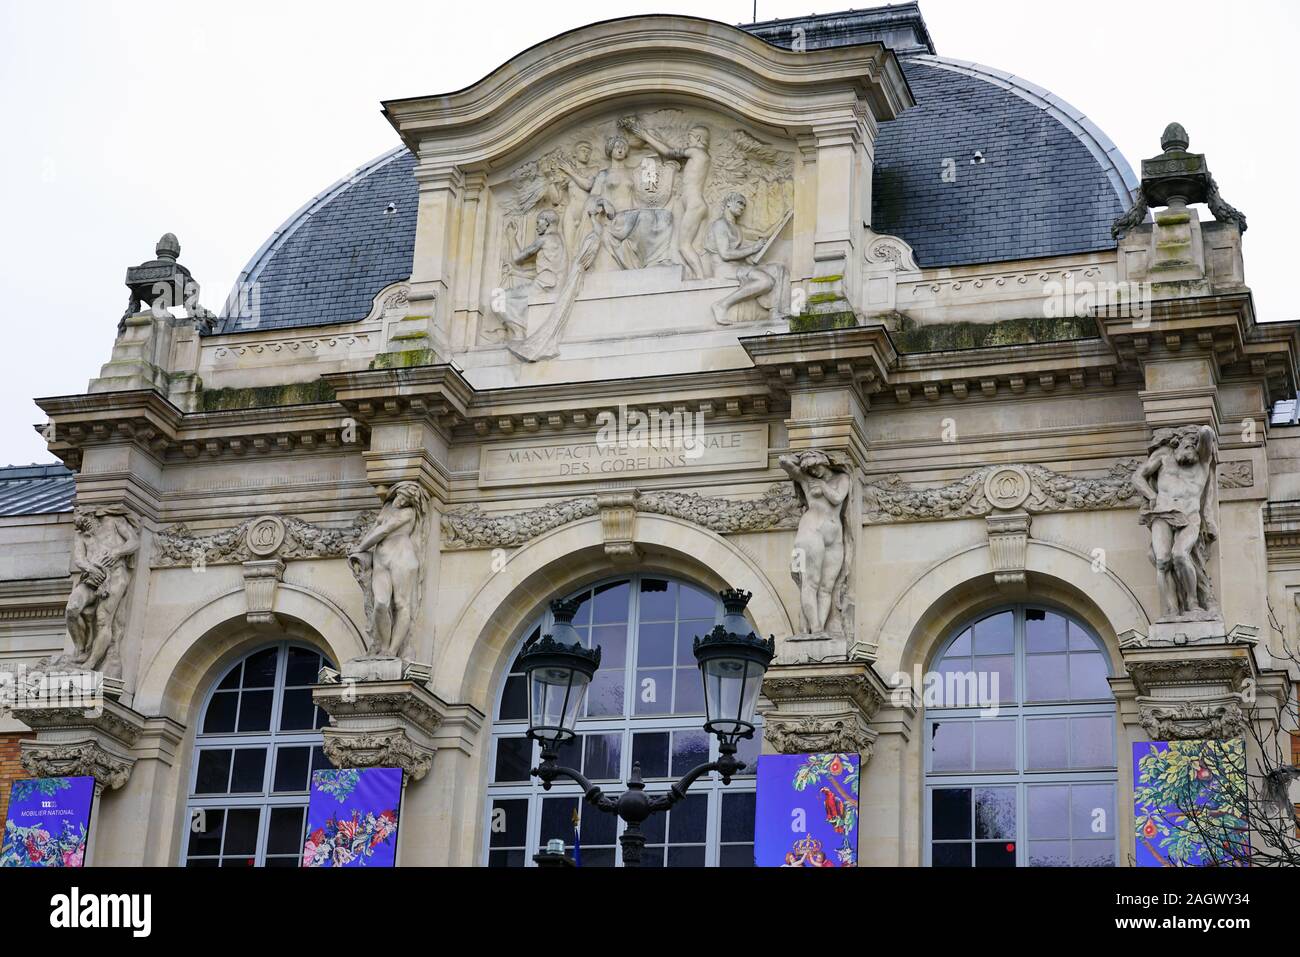 PARIS, FRANCE -18 DEC 2019- View of the historic Manufacture des Gobelins (Gobelins Manufactury), a historic tapestry factory in the 13th arrondisseme Stock Photo